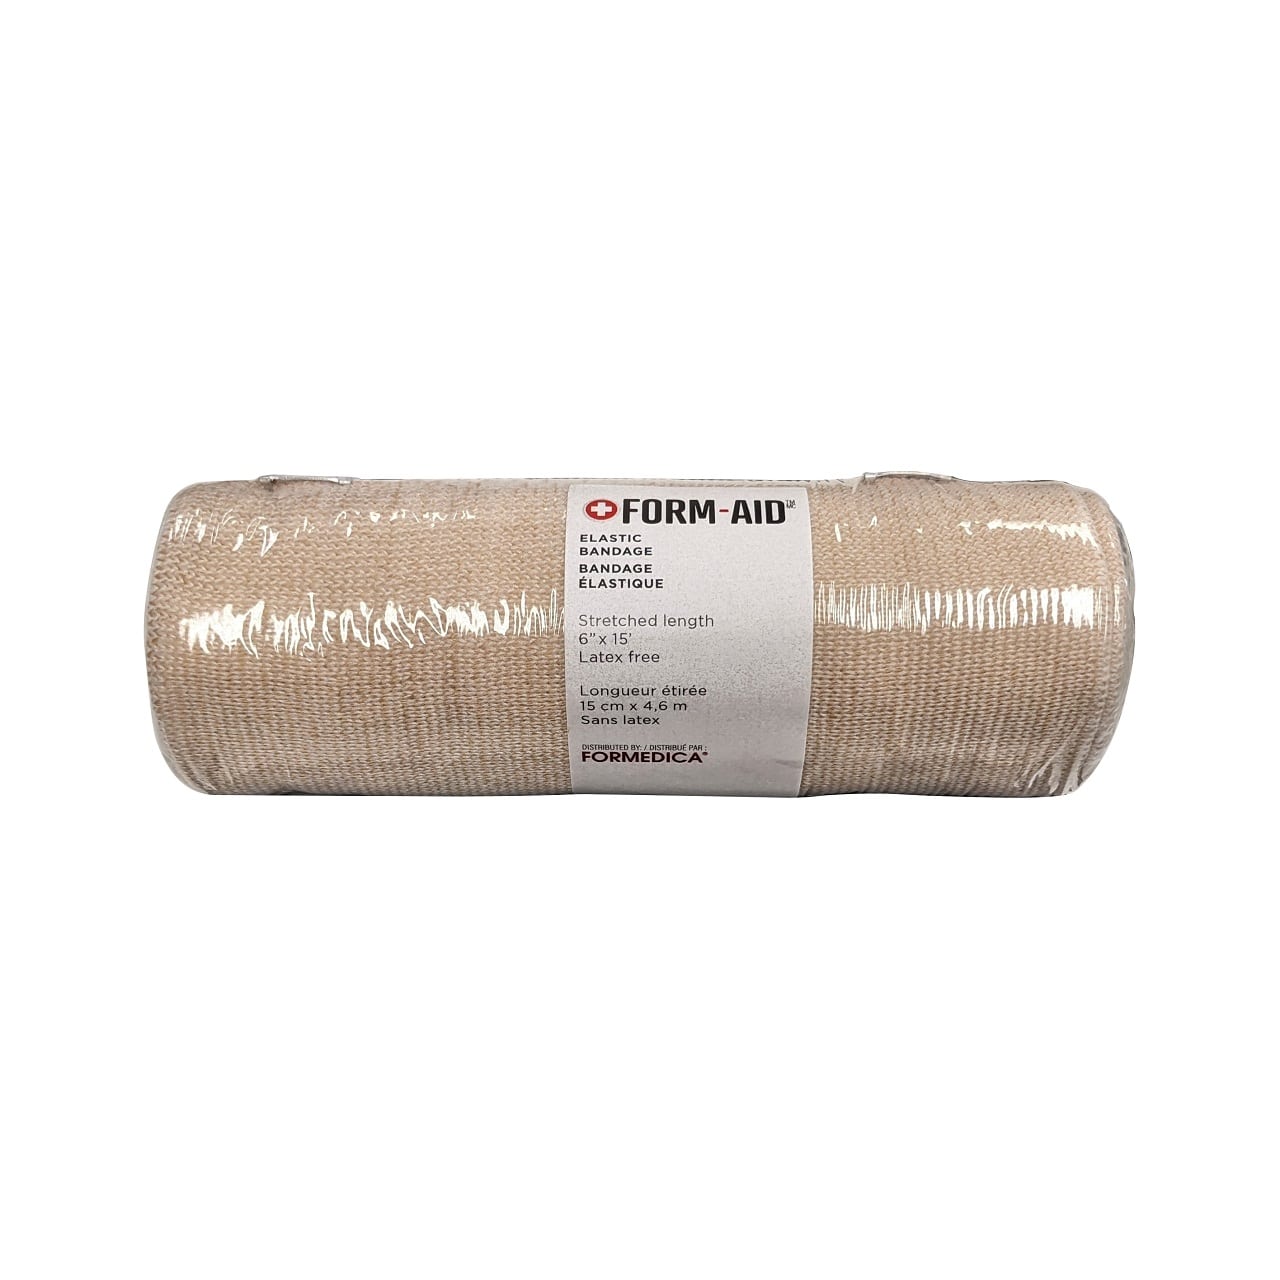 Product label for Formedica Elastic Bandage (6" x 15')